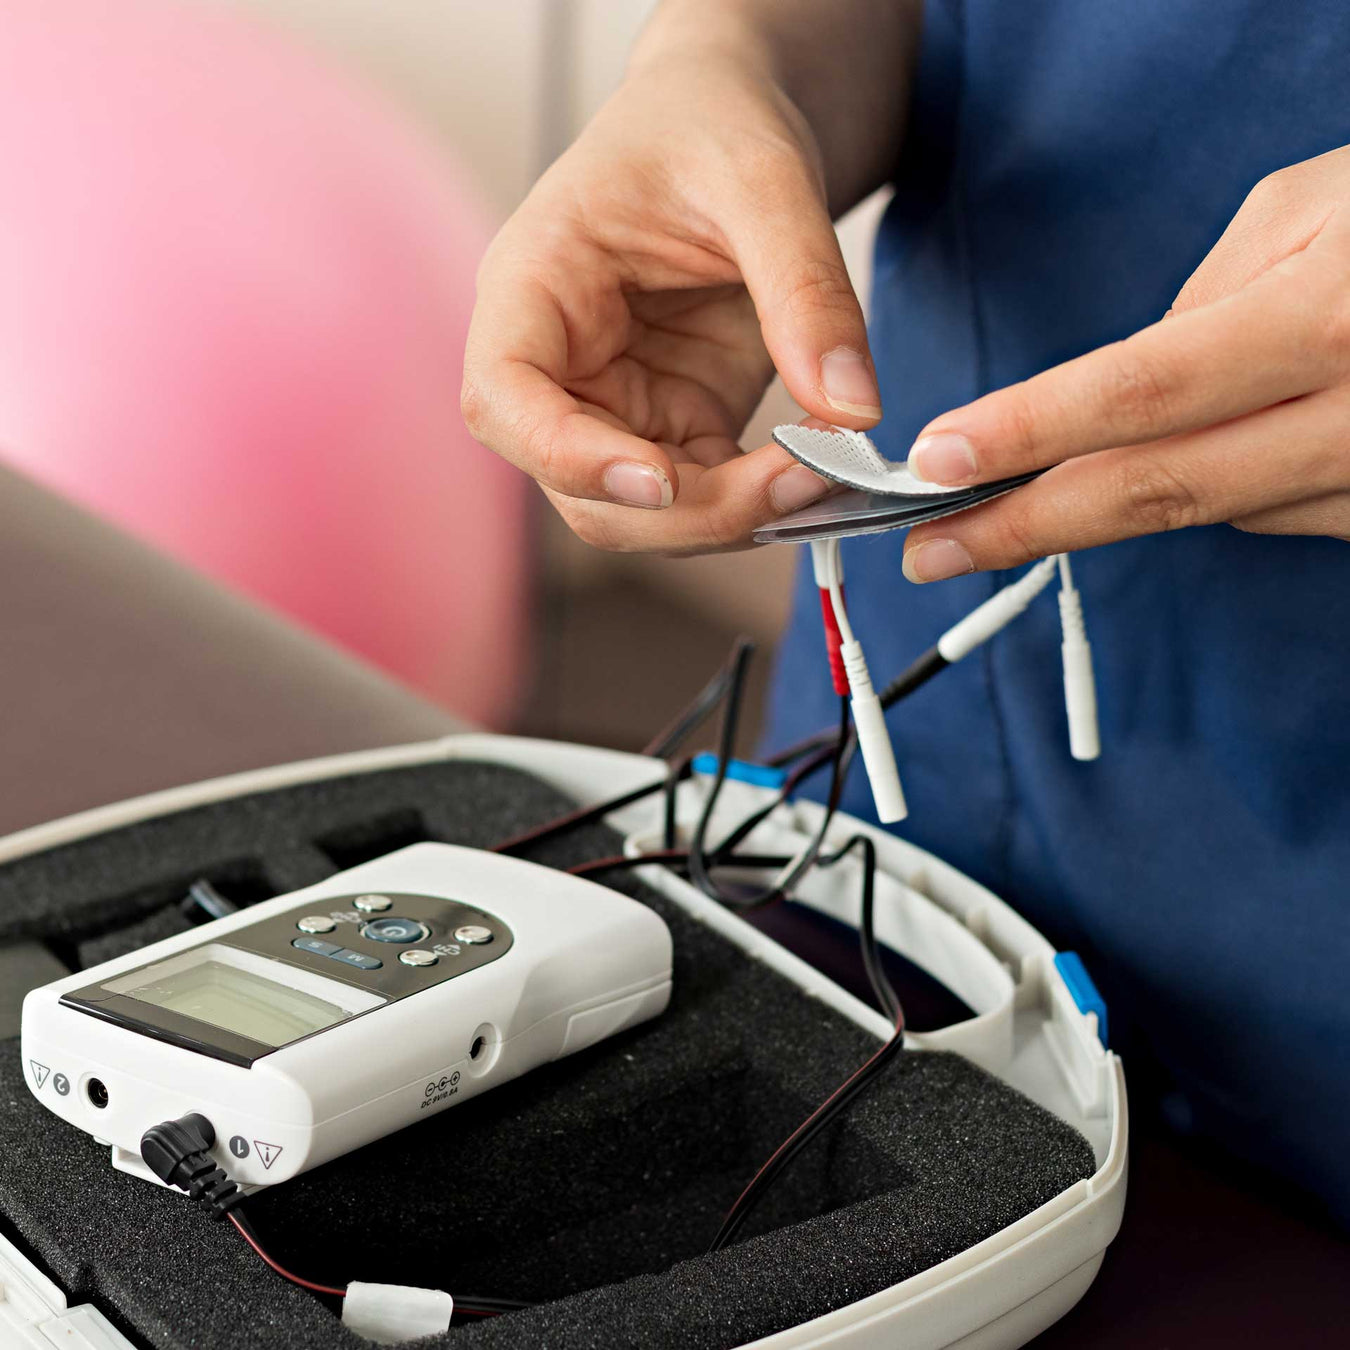 clinician setting up an electrotherapy STIM unit for physical therapy